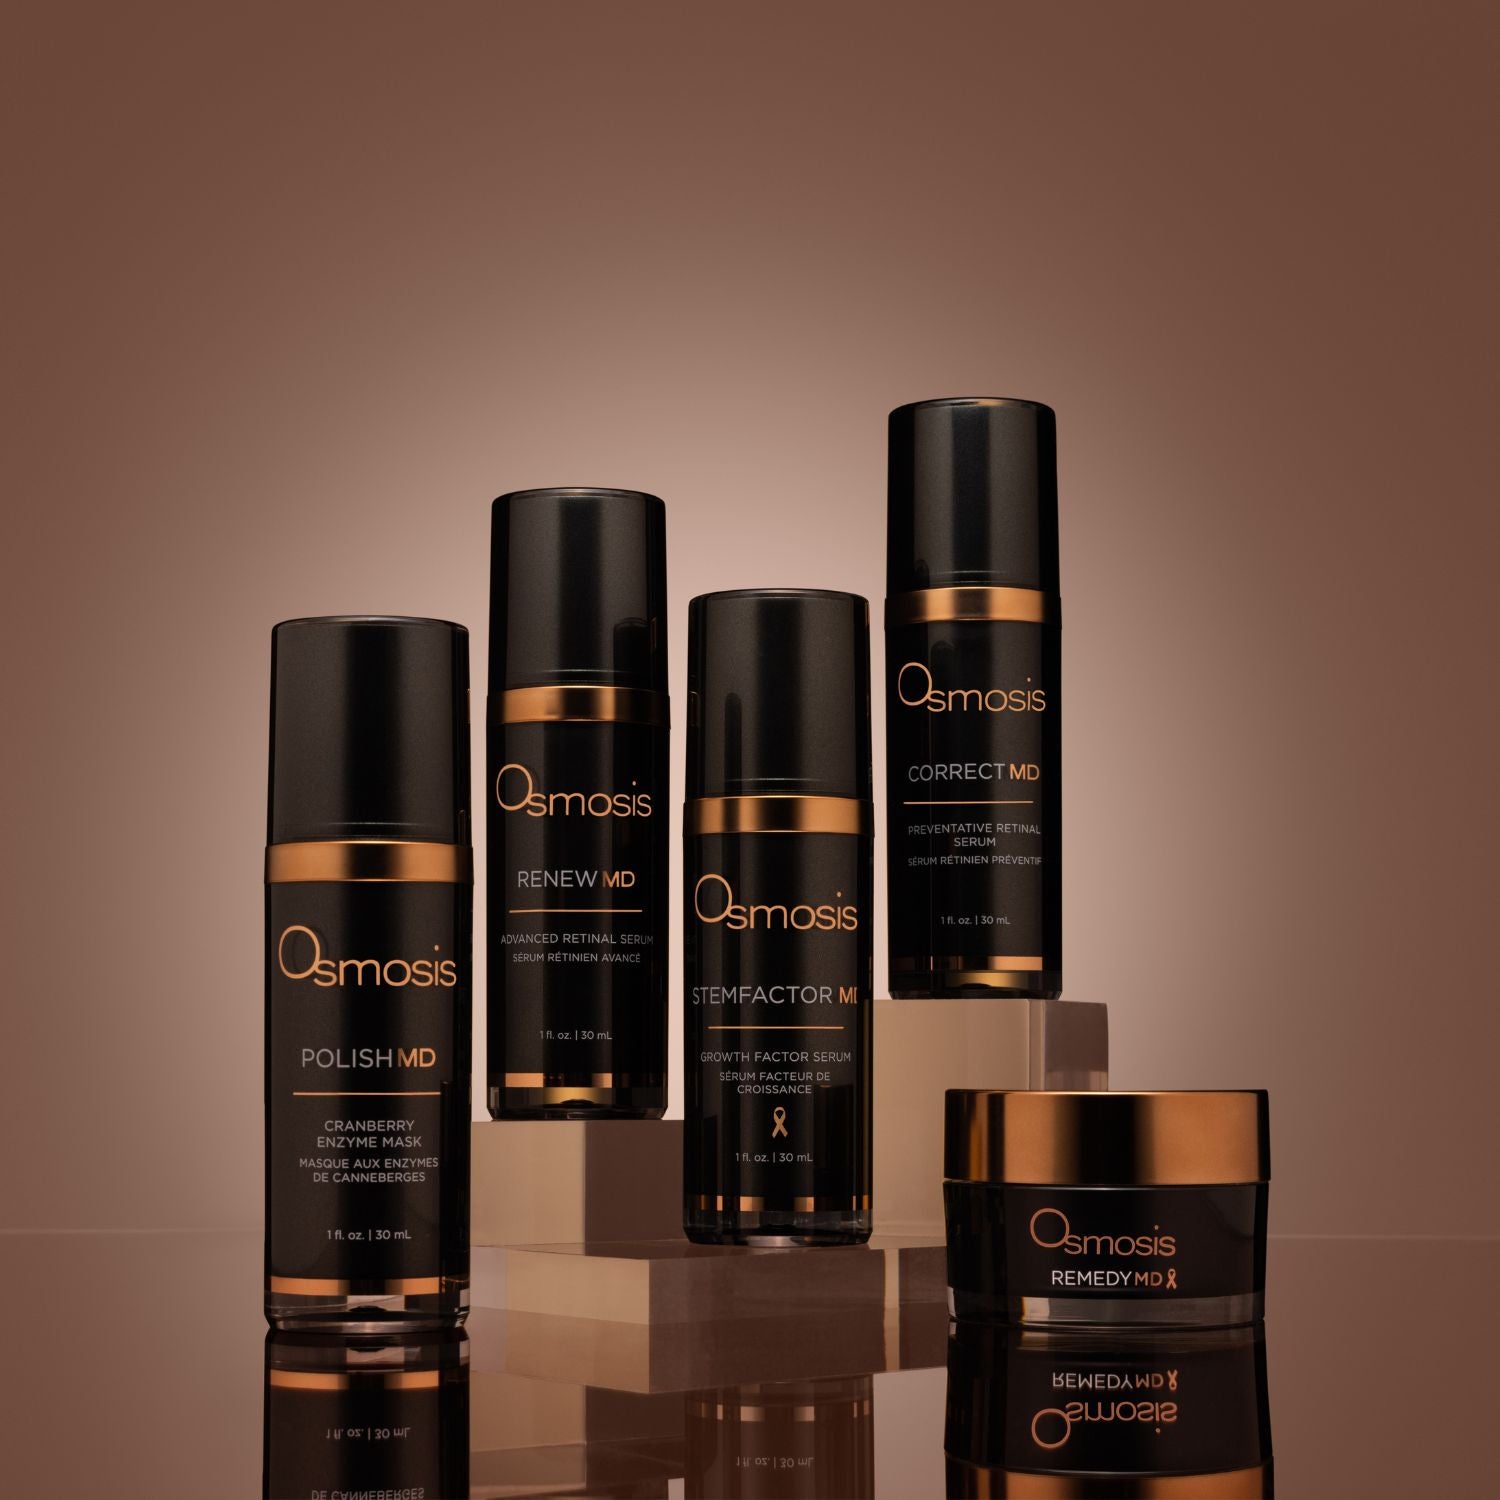 Five black and gold bottles of md advanced skincare collection by osmosis on display shelves 